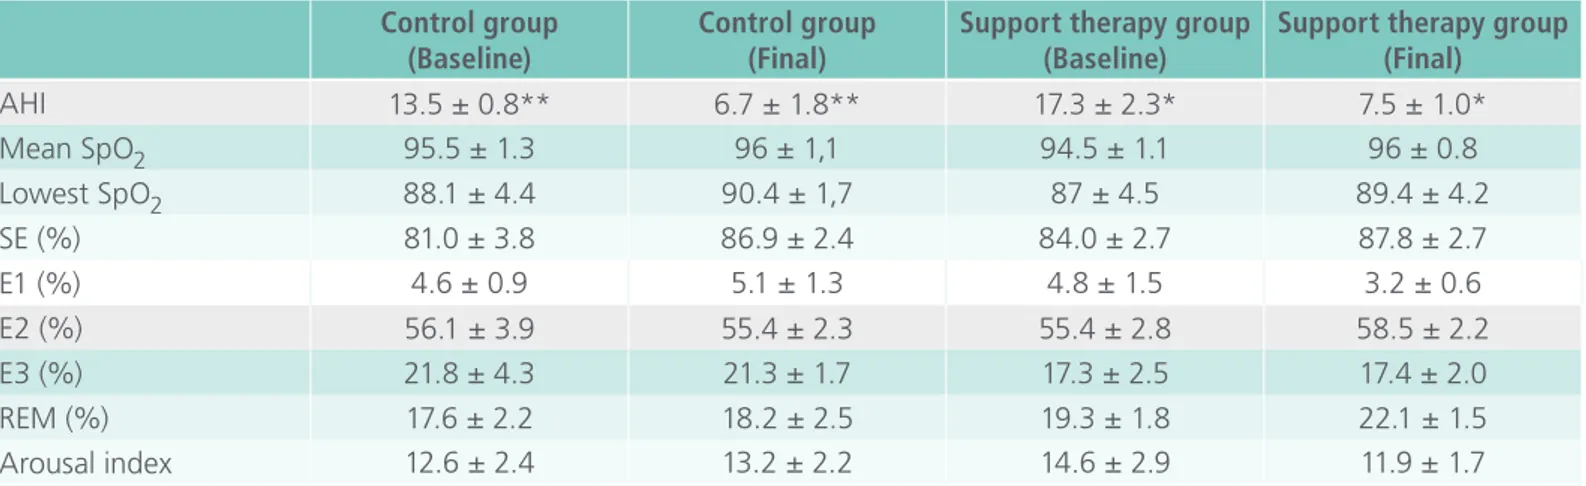 Table 3.  MAD compliance and exercise compliance between control and support therapy group